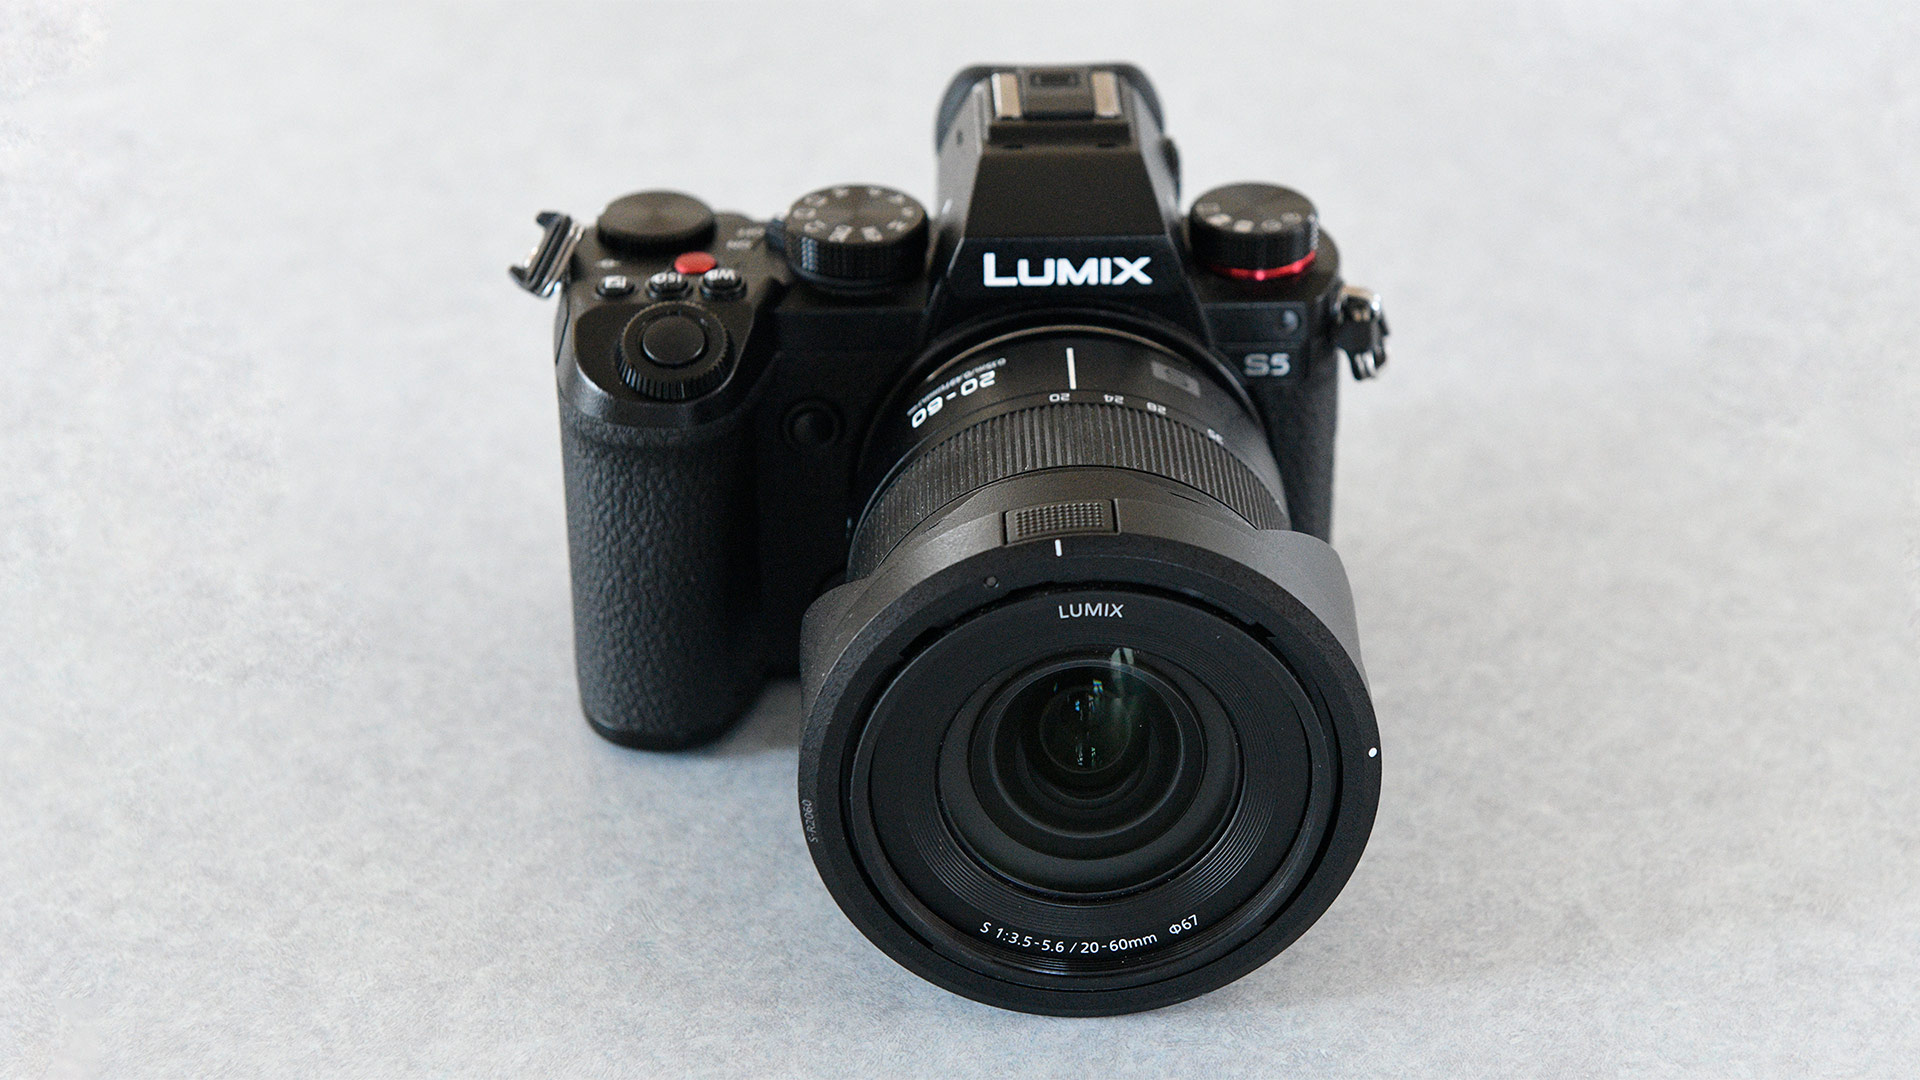 The Panasonic Lumix S5 showing the front of the camera